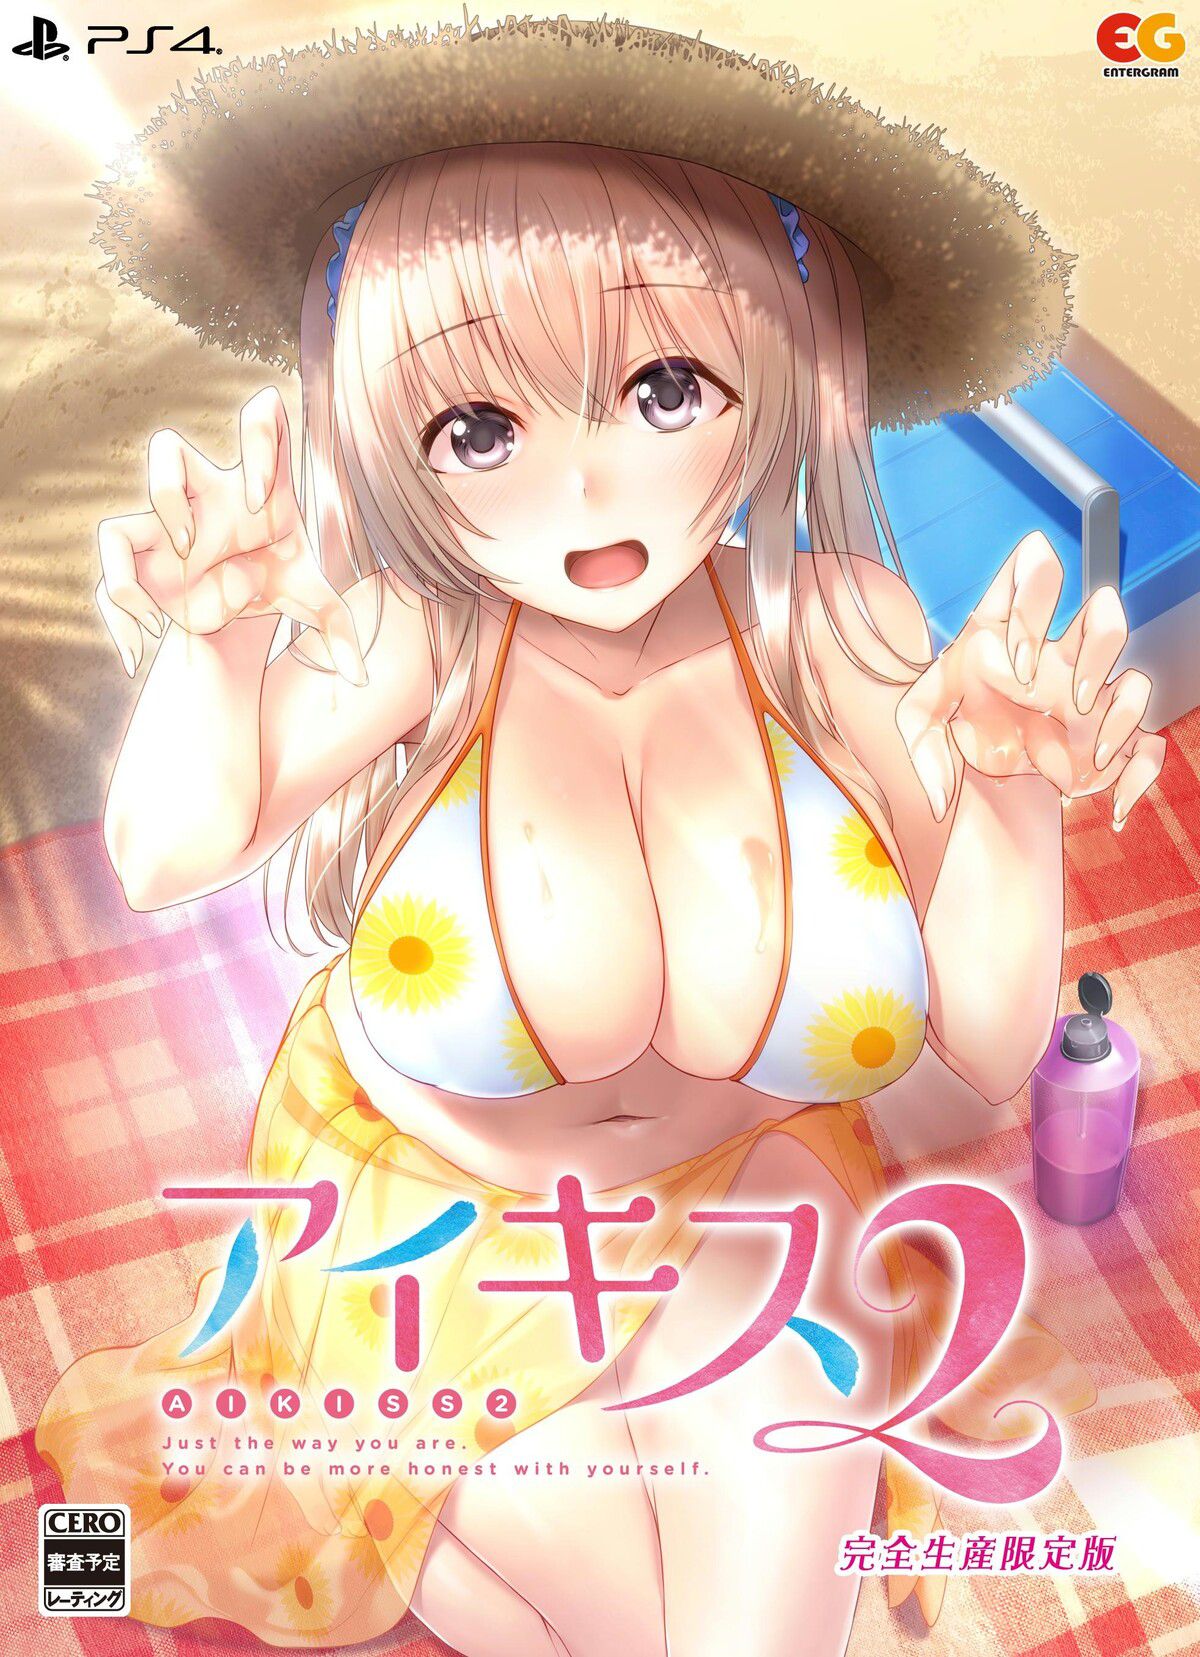 PS4 / switch version [Aikis 2] erotic event CG such as girl's skirt raise and swimsuit 5